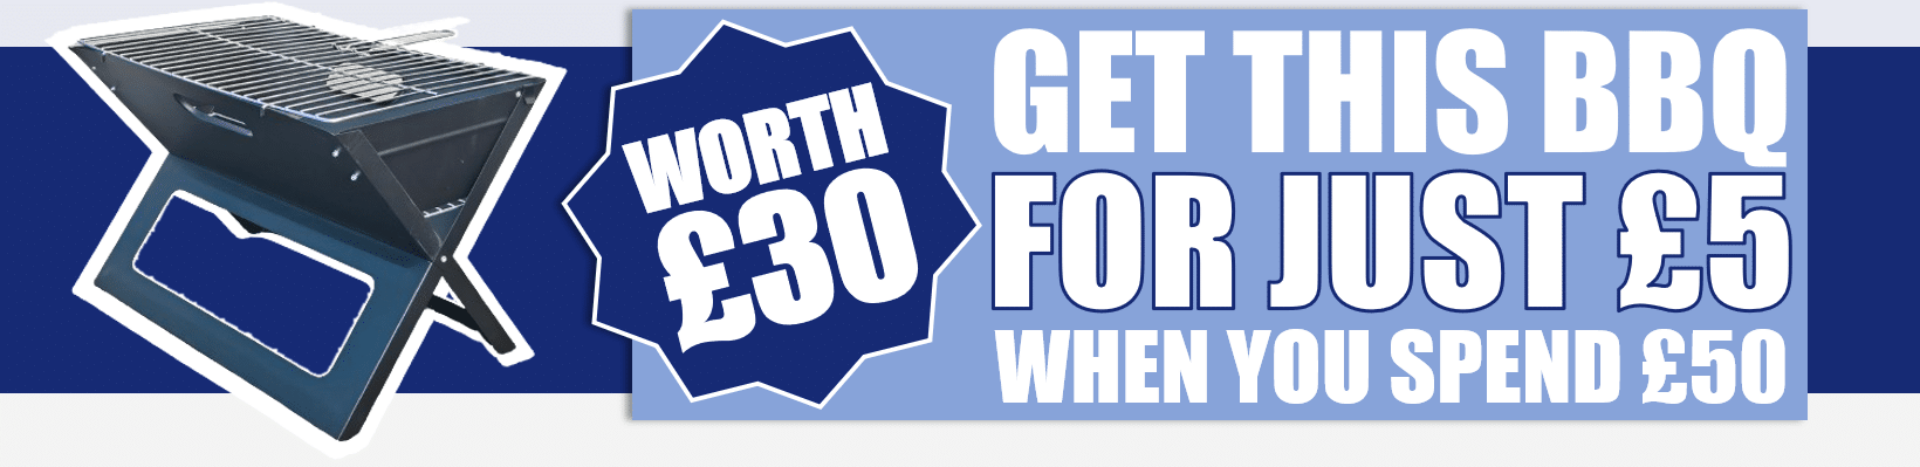 Homepage Banner - £5 BBQ WITH £50 SPEND